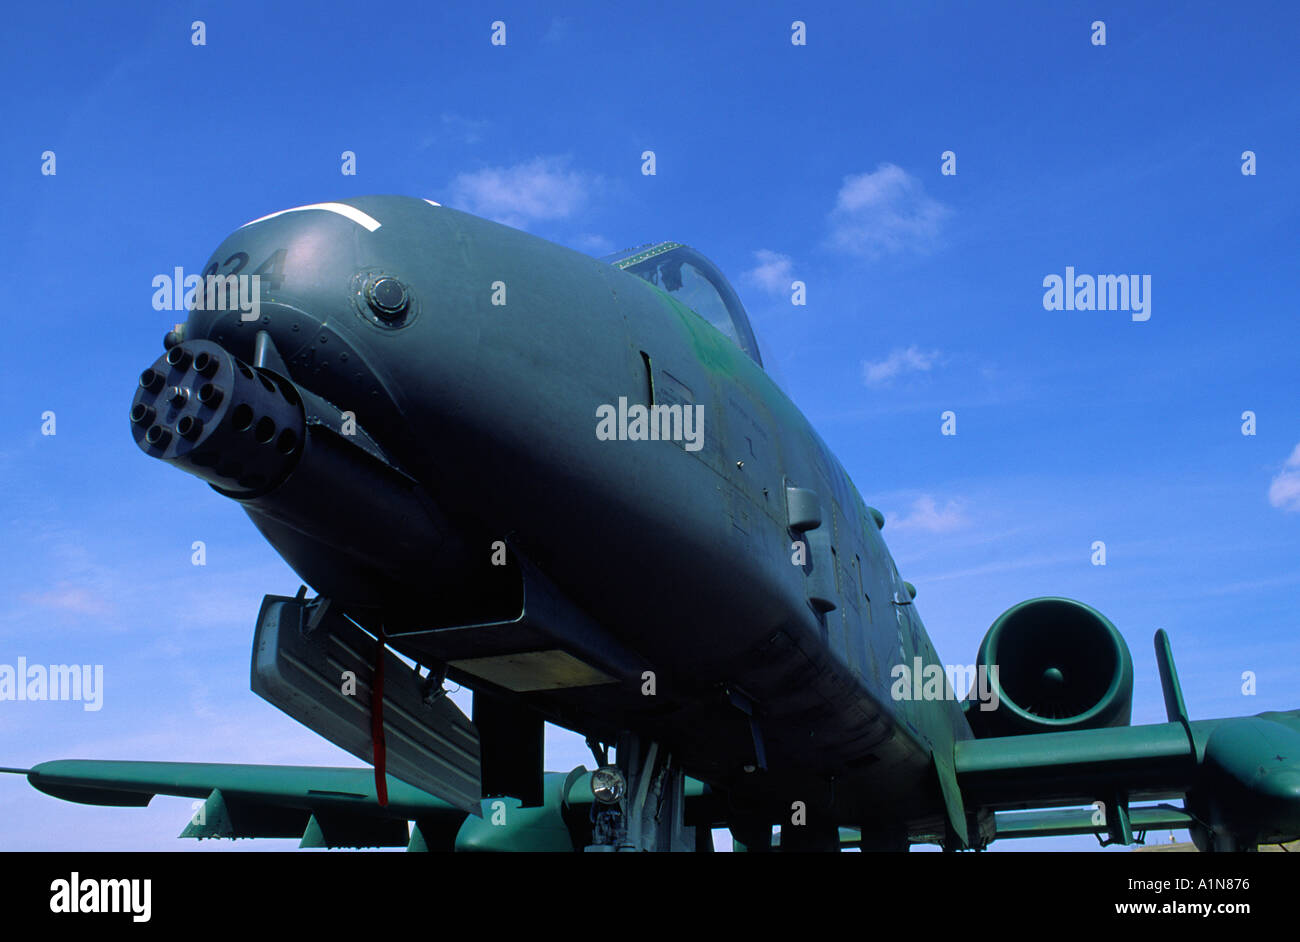 A 10 Thunderbolt jet tank buster aircraft United States Air Force USAF Stock Photo